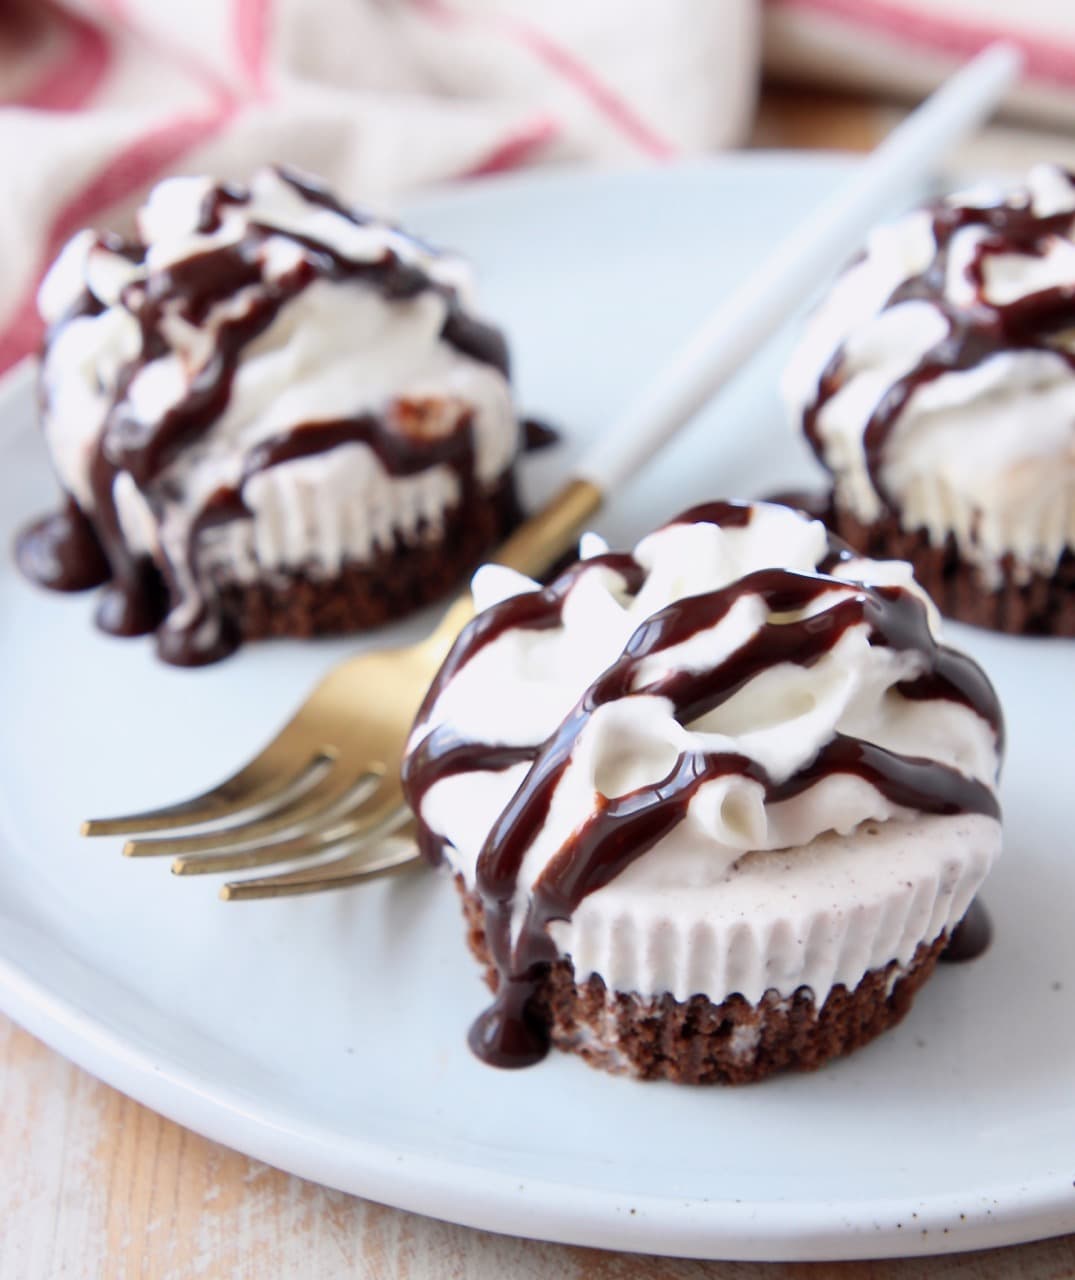 Mini chocolate ice cream cakes on a plate topped with chocolate syrup